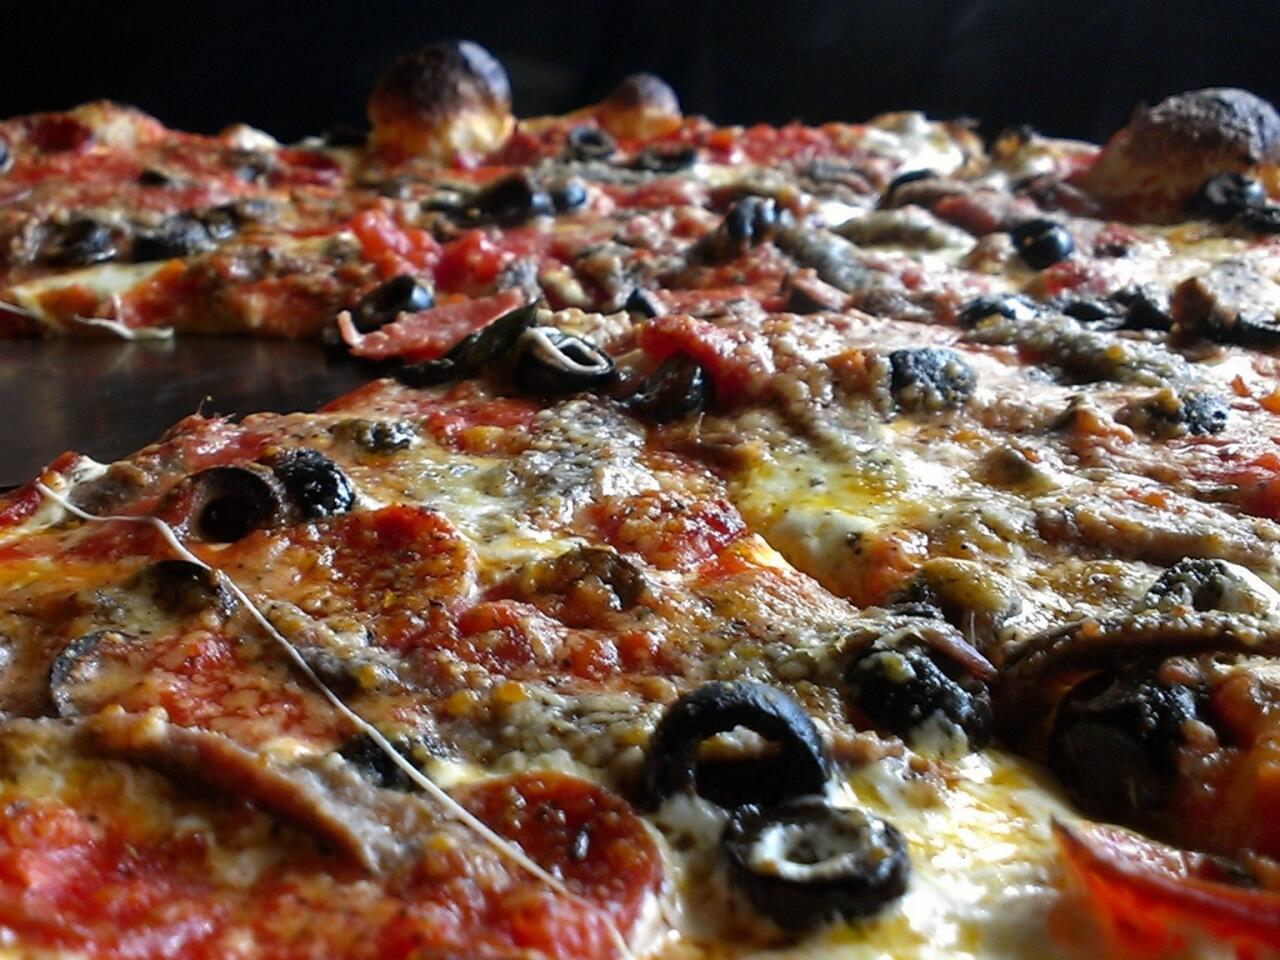 Grimaldi's in El Segundo serves New York-style pizzas from its coal-burning oven.